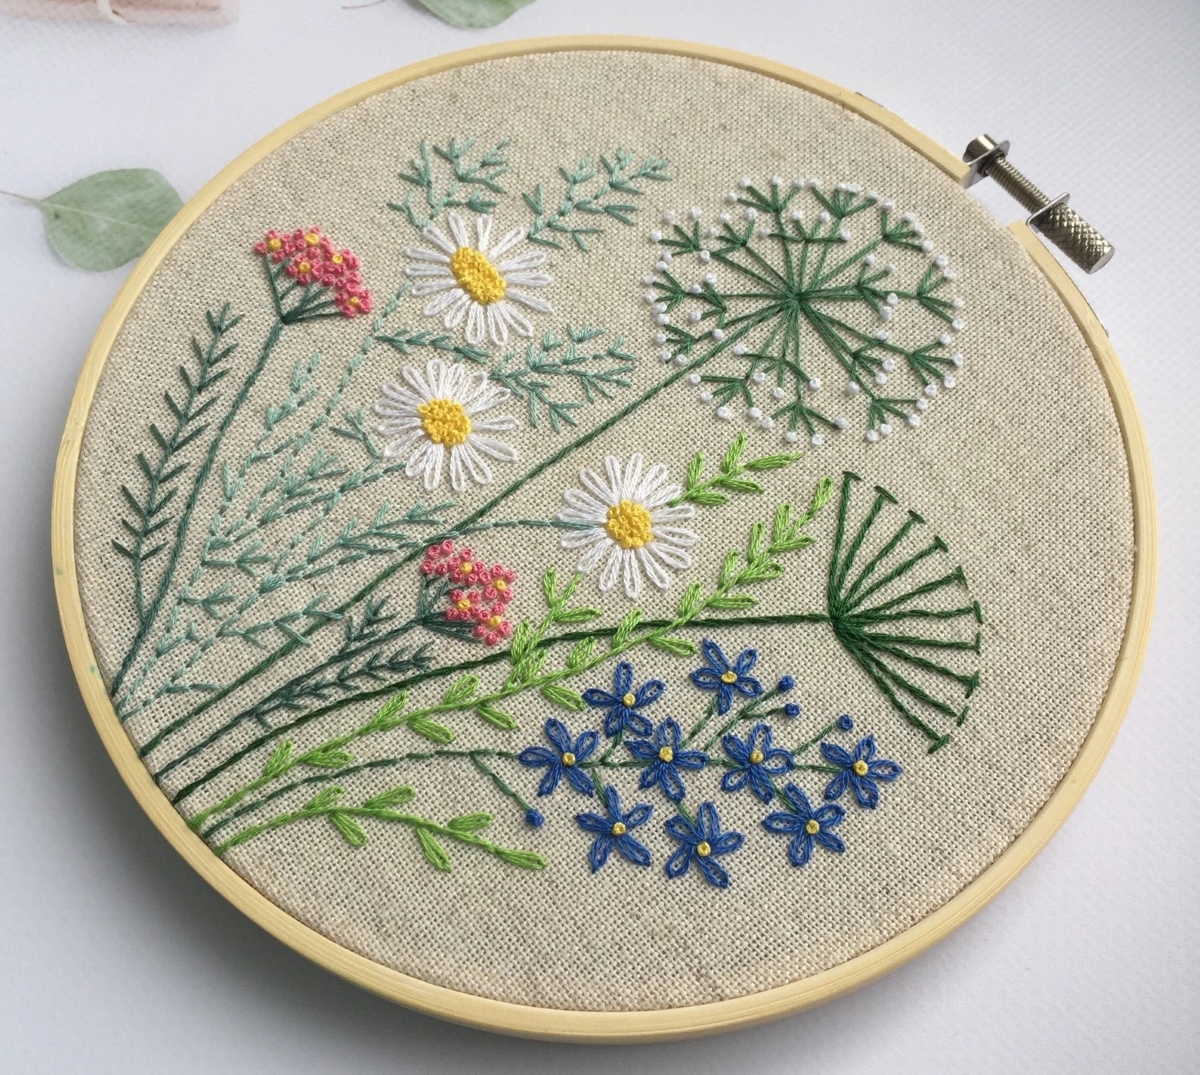 Embroidered wildflowers